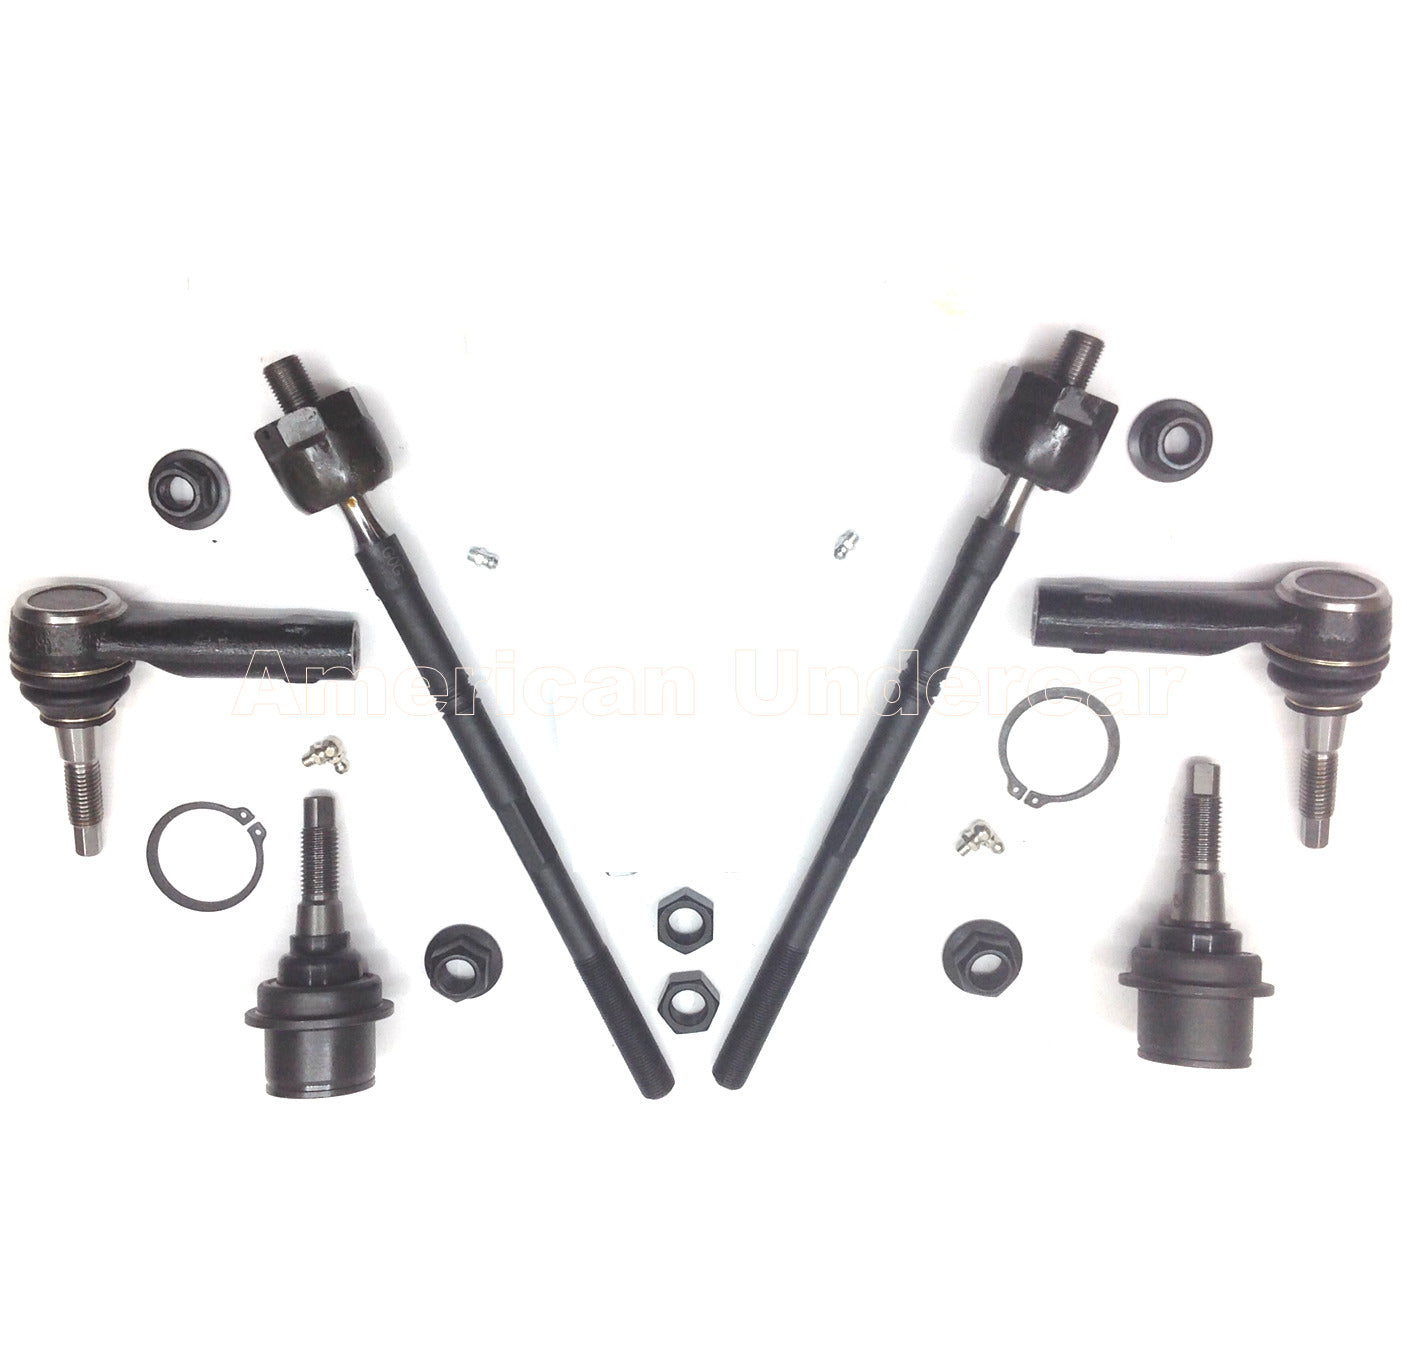 Lifetime Lower Ball Joints Tie Rod Steering Kit for 2004-2008 Ford F150 4x4